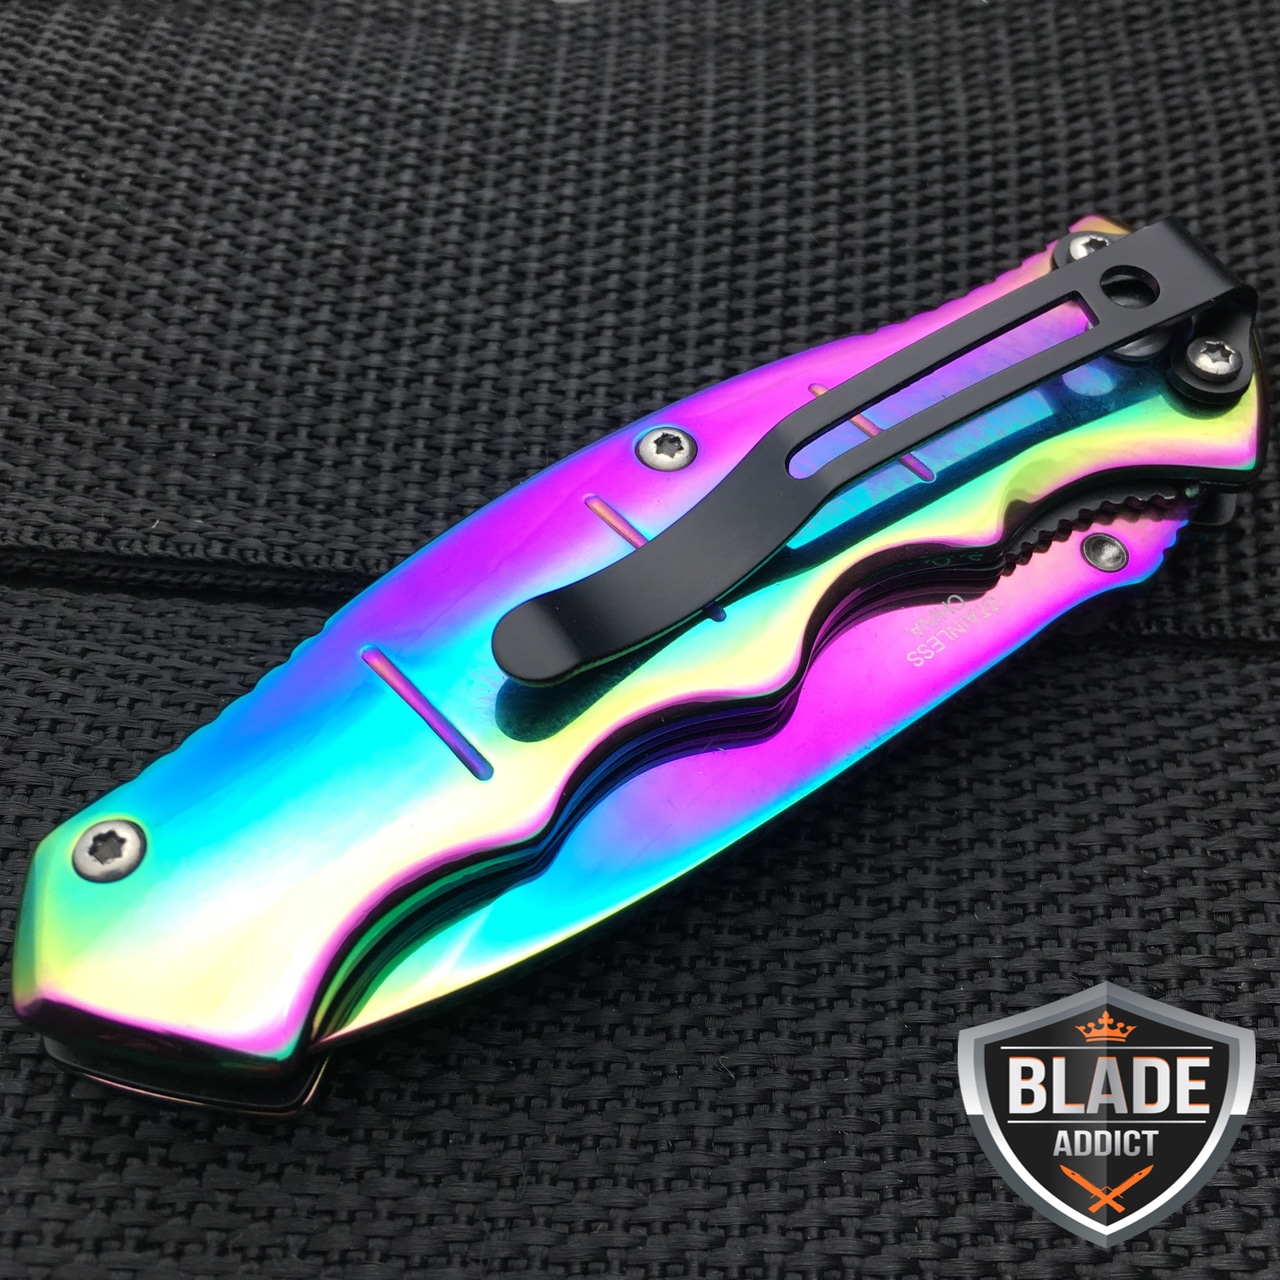 6.5" TITANIUM OXIDE RAINBOW TACTICAL SPRING ASSISTED OPEN FOLDING POCKET KNIFE 8